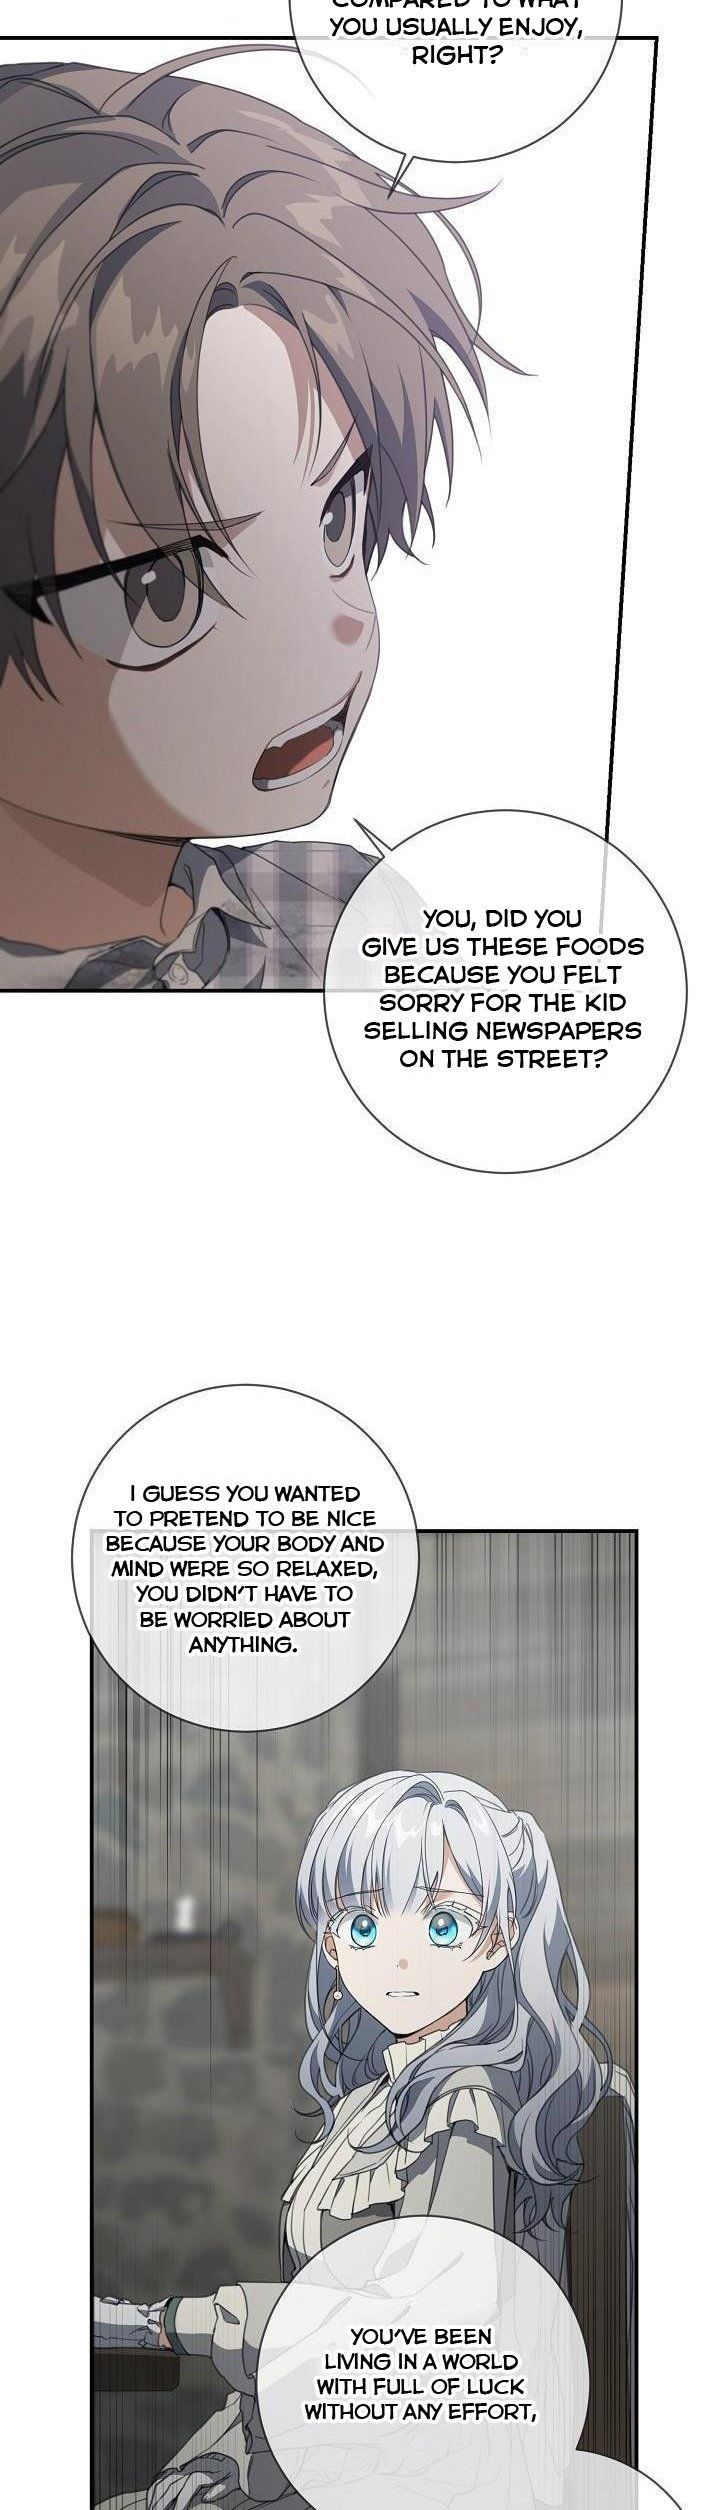 Into the light once again Chapter 64 page 21 - MangaWeebs.in